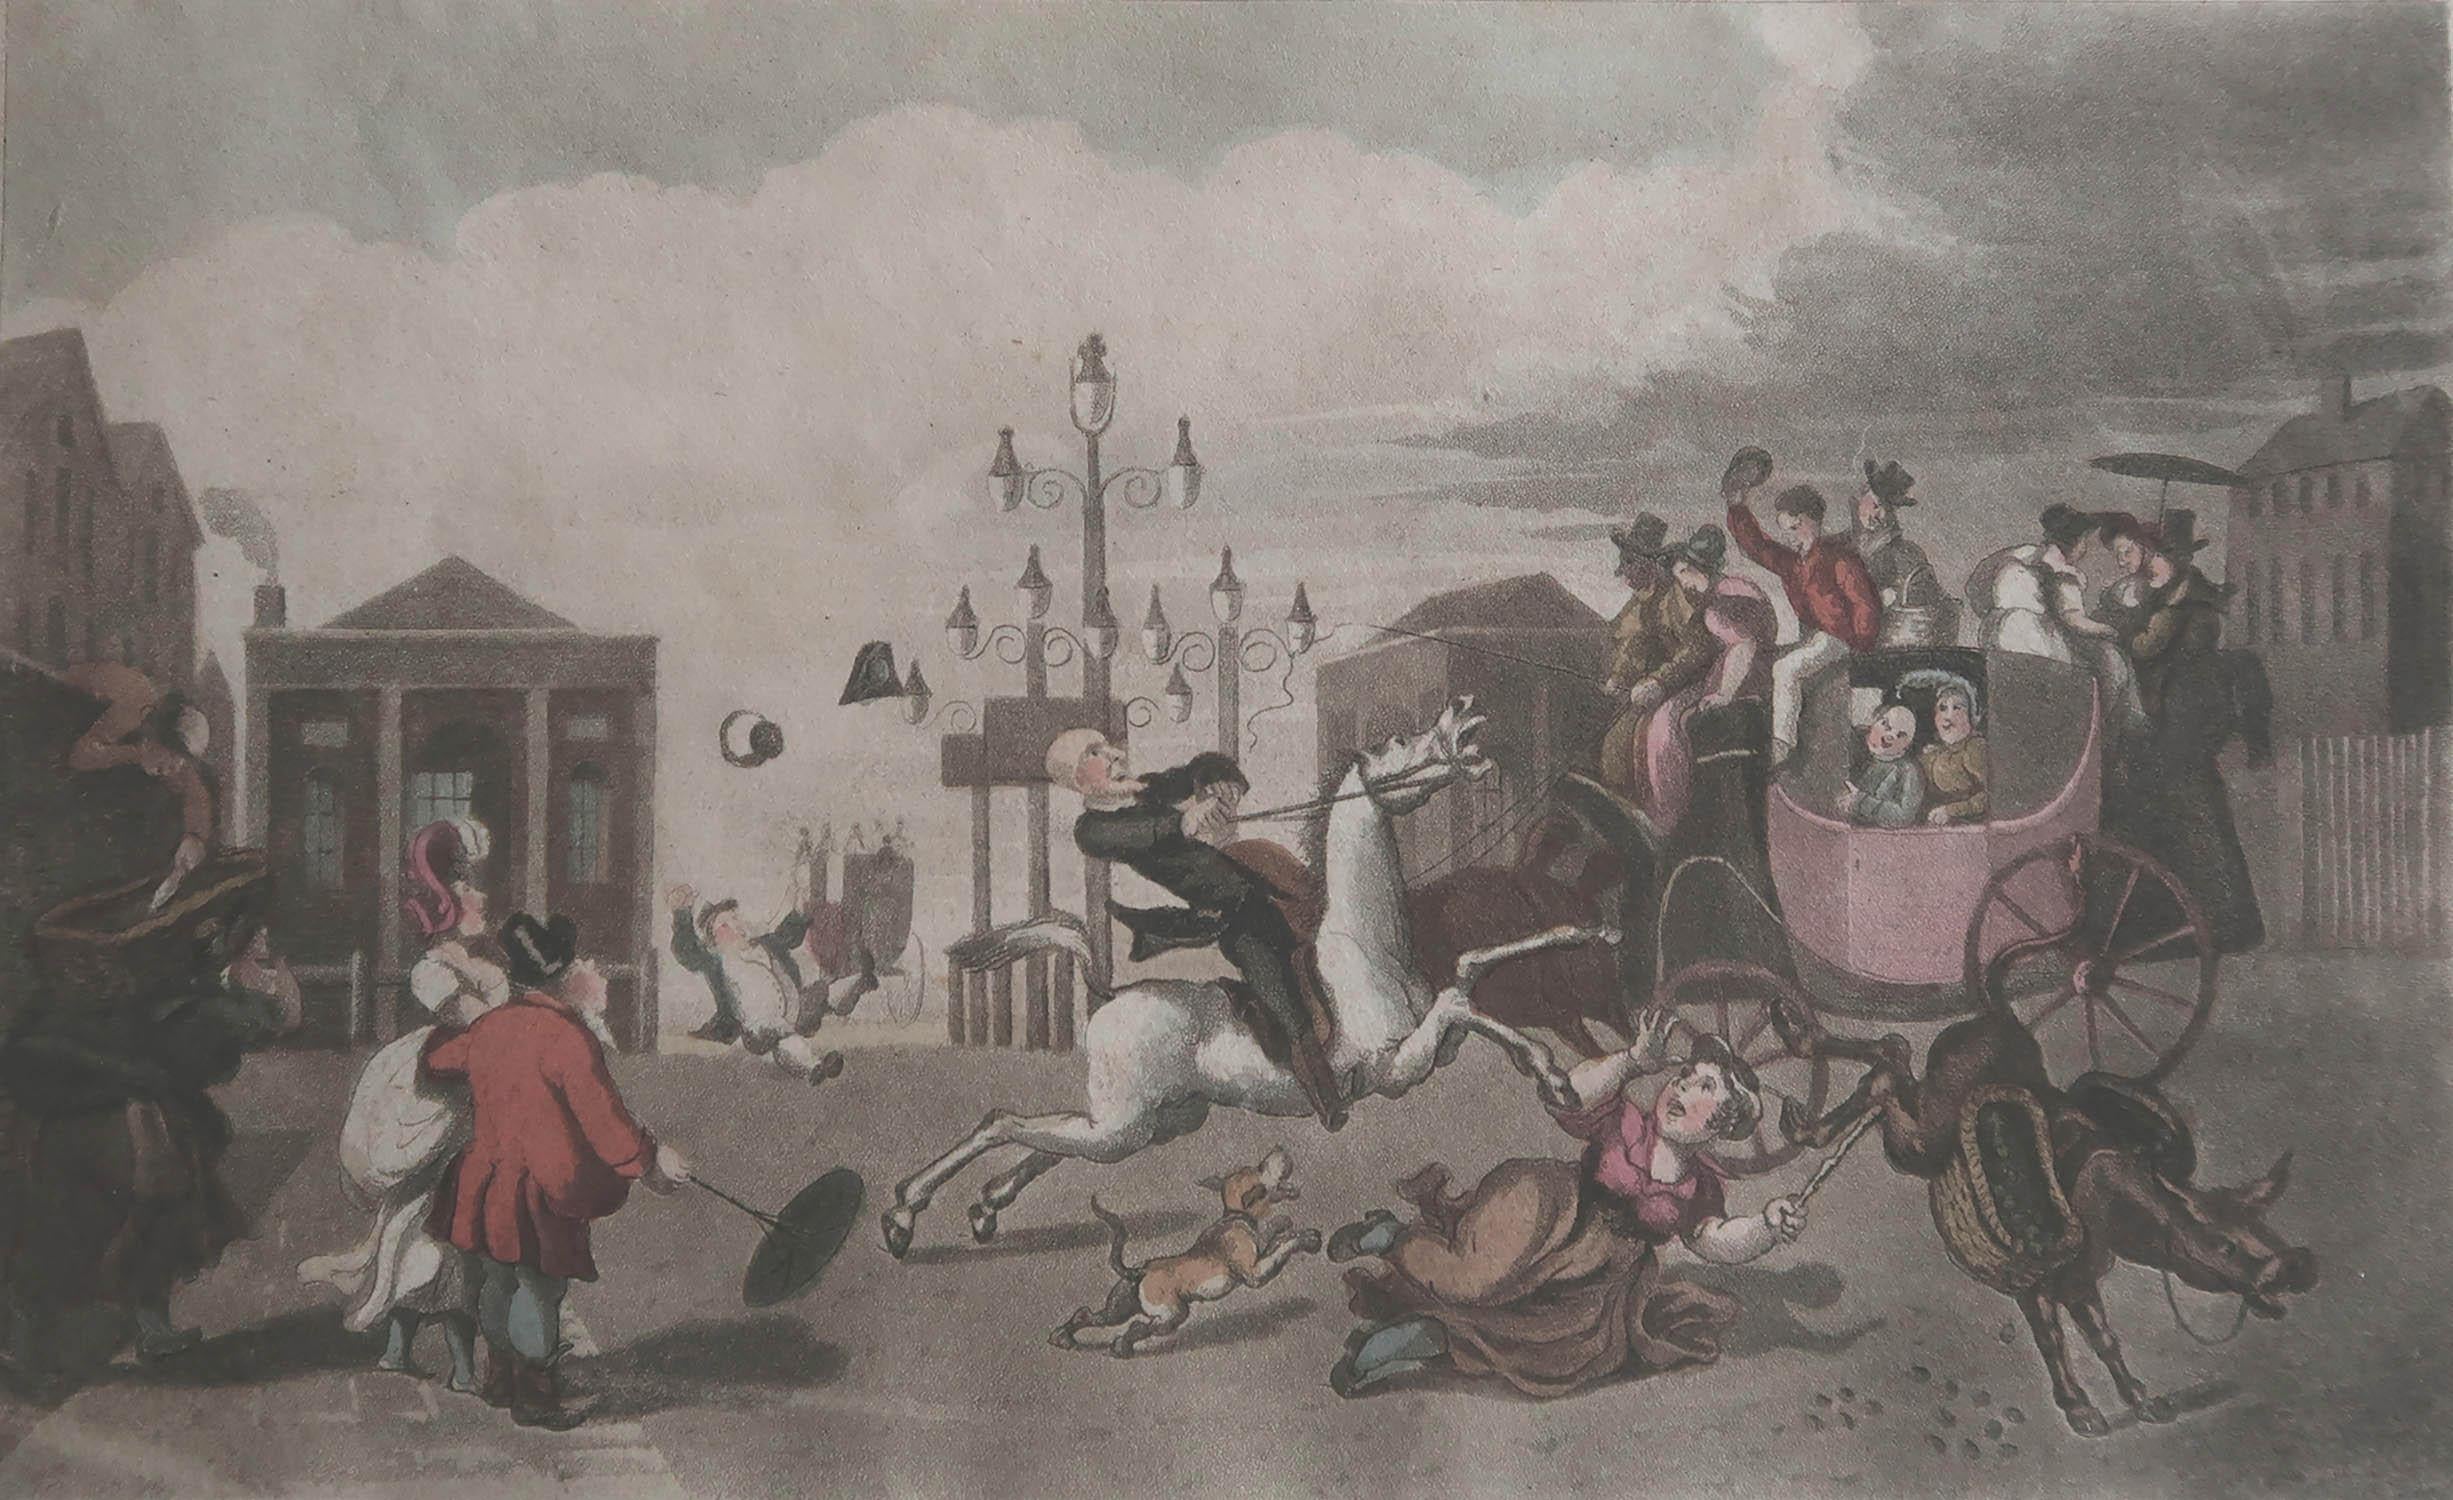 Great image by Thomas Rowlandson from the 